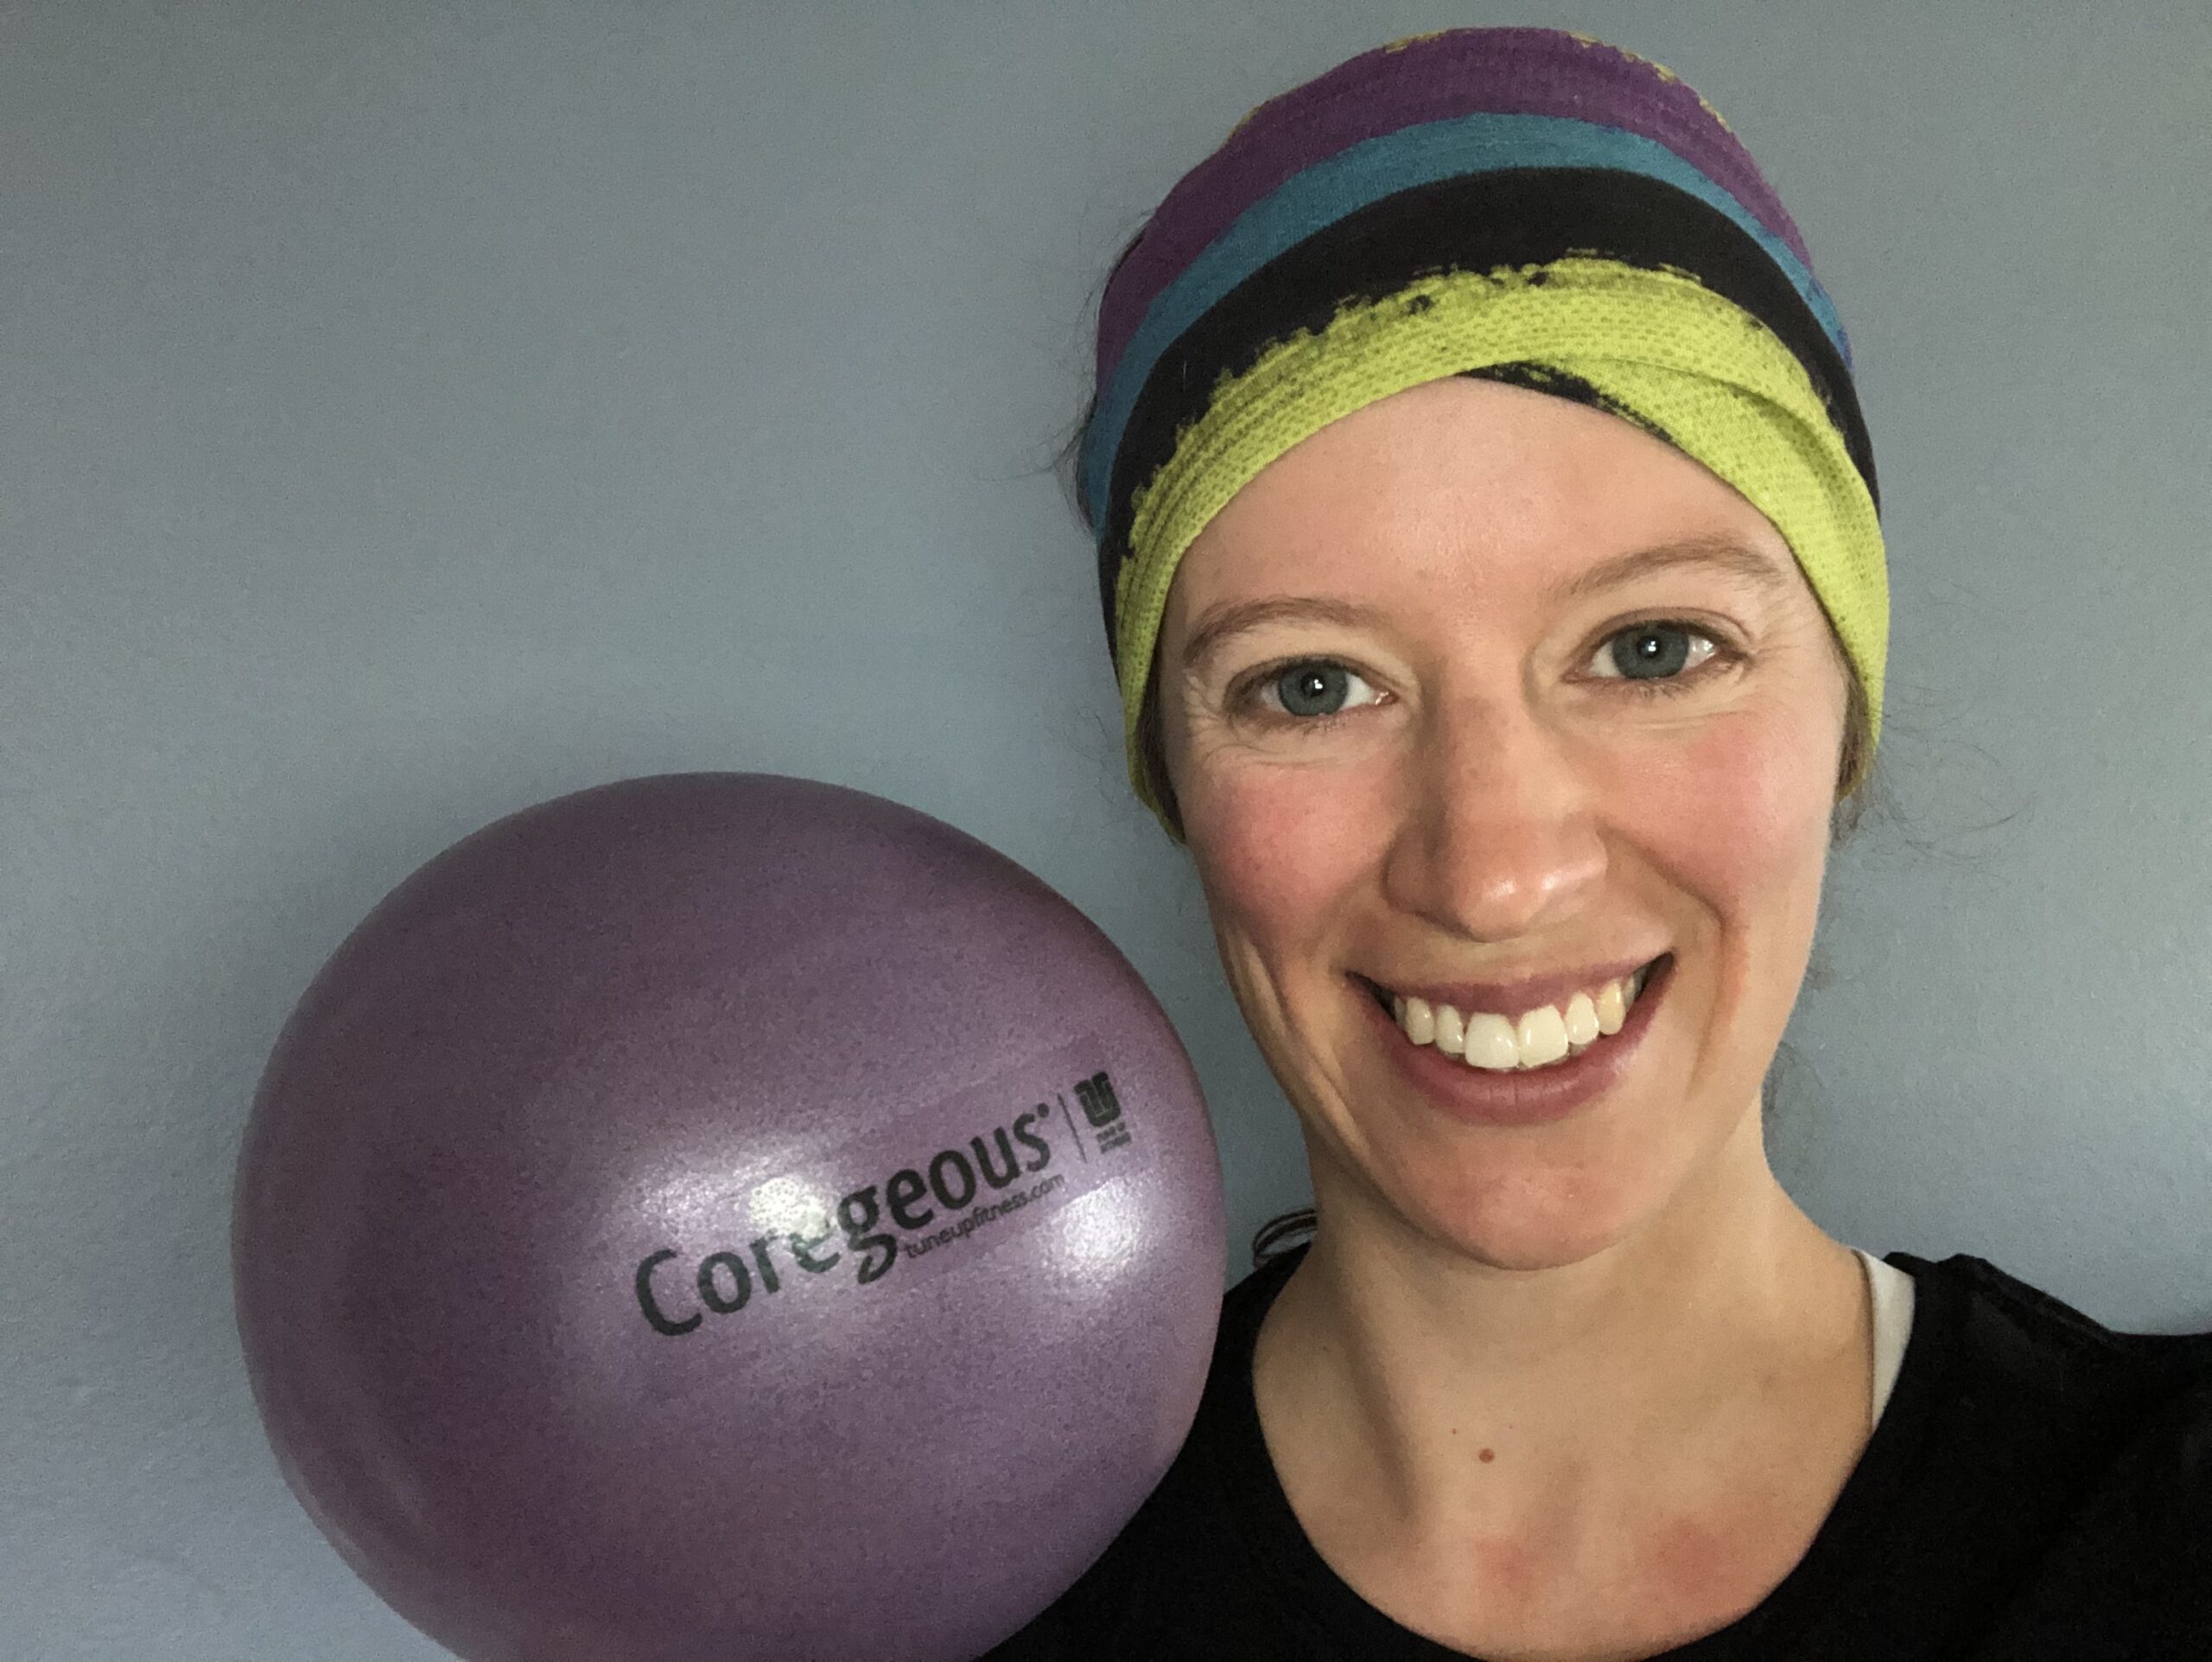 Coregeous ball: 6 techniques to make the most of it!